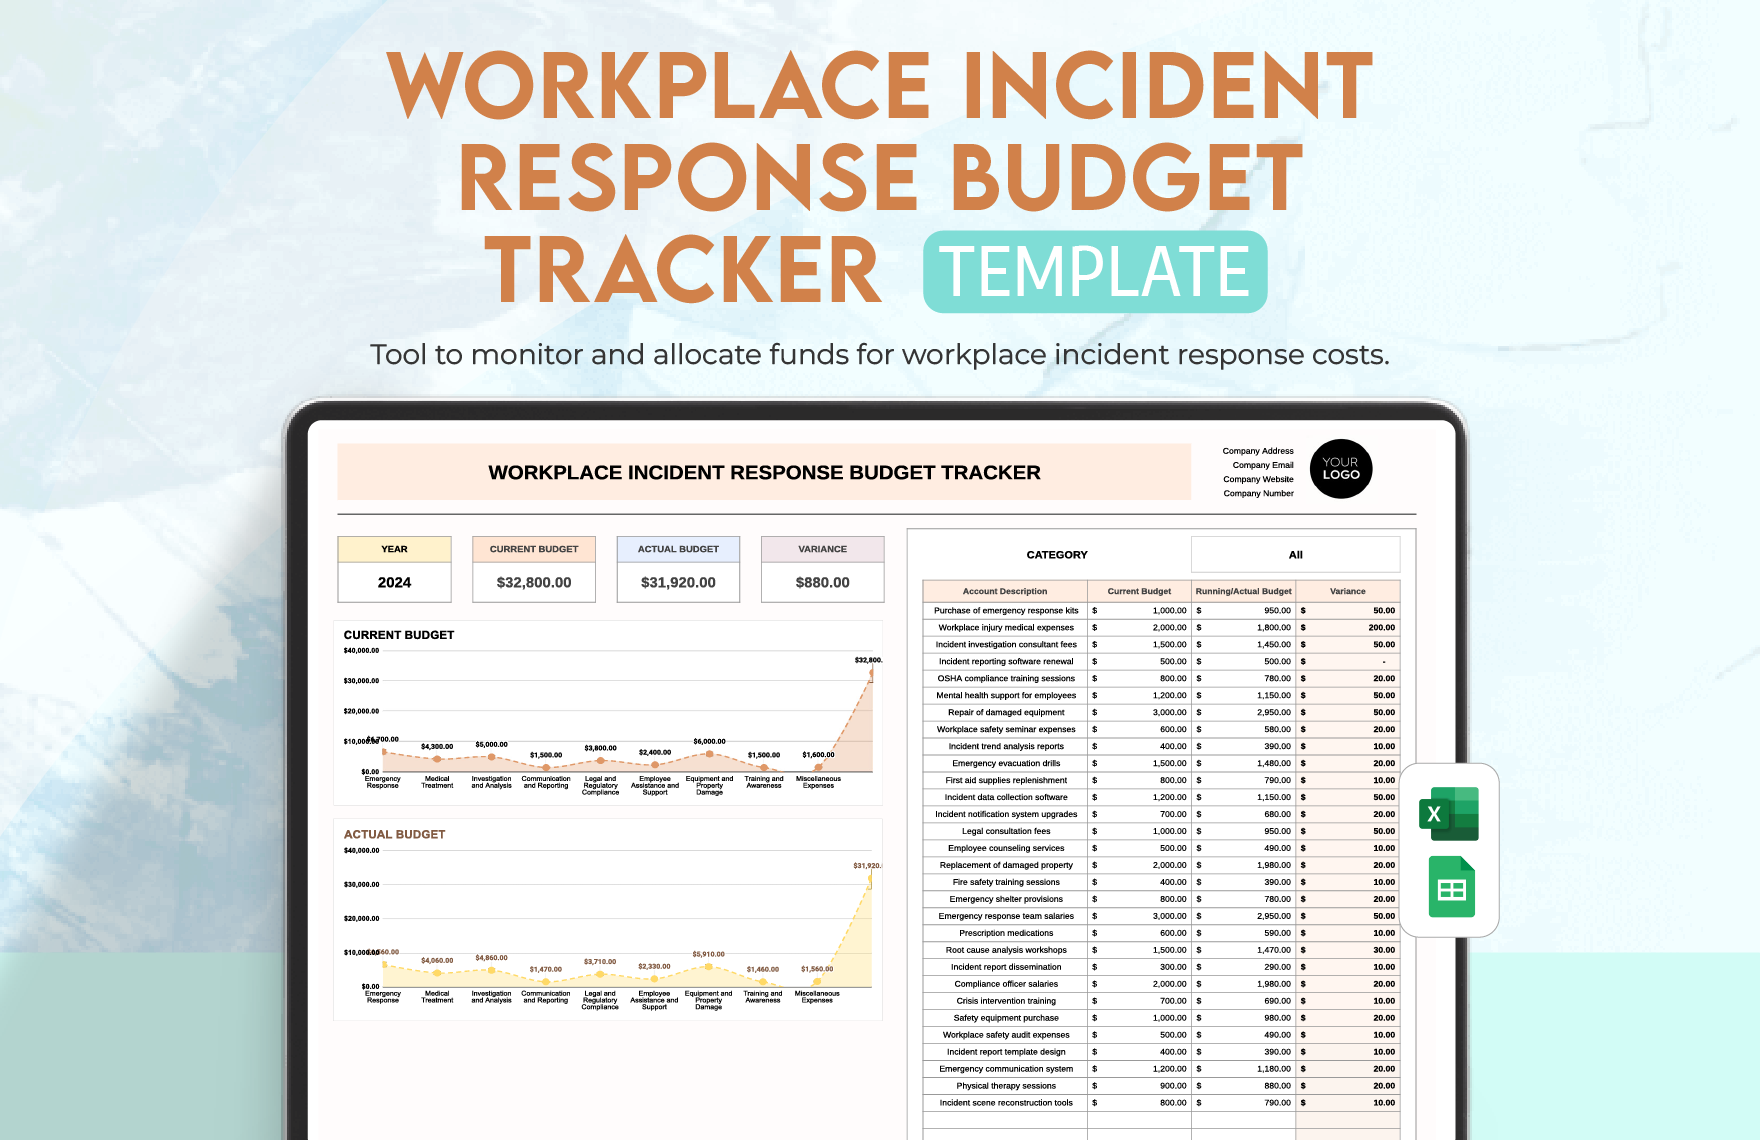 Workplace Incident Response Budget Tracker Template in Excel, Google Sheets